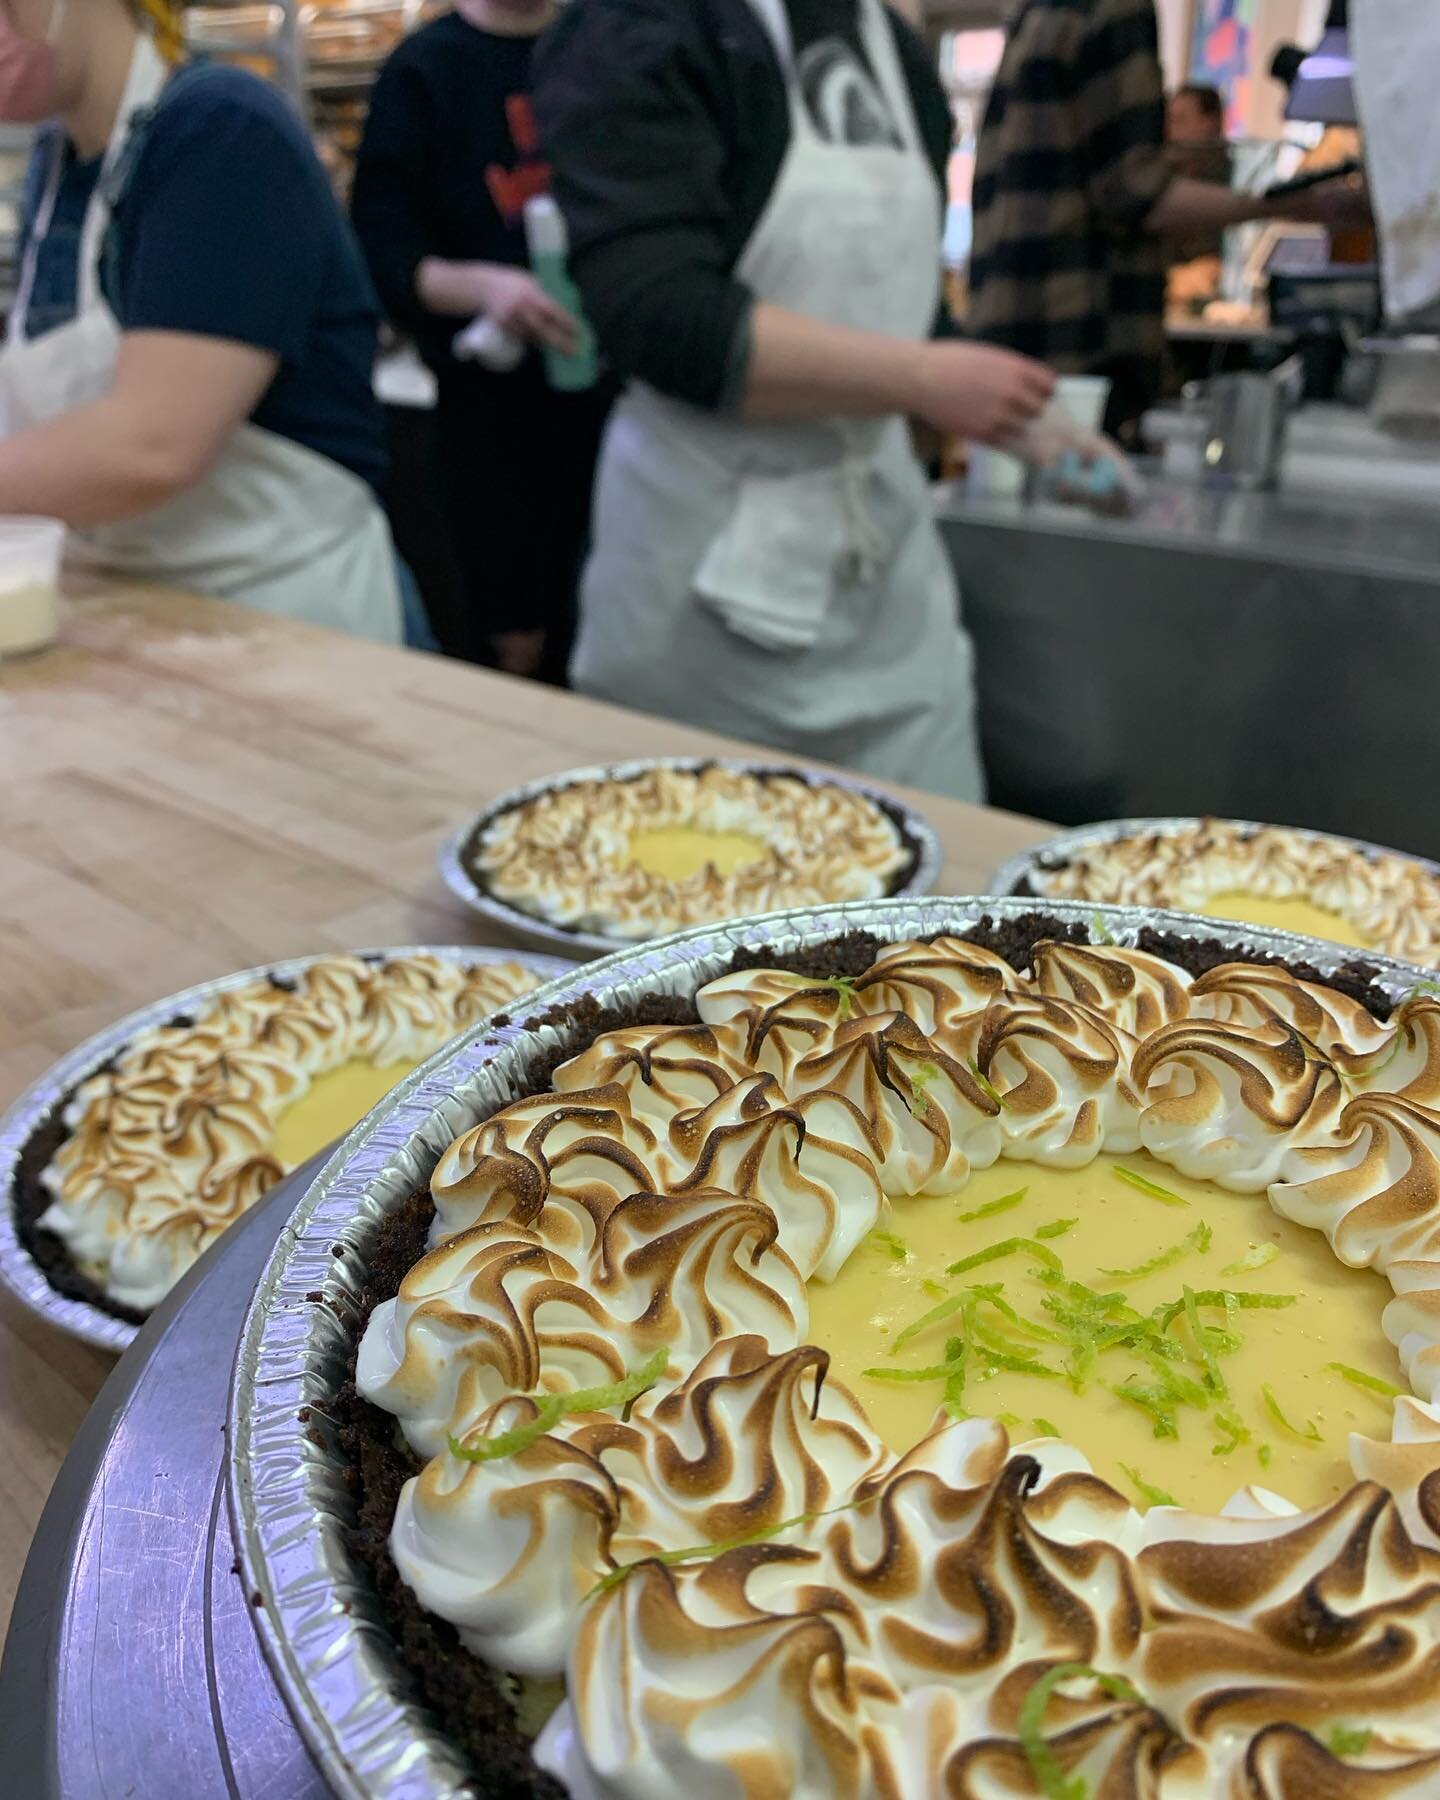 Spring has sprung and we have both our Passover and Easter Menus live on our website! Key Lime Pies, Strawberry Meringue Cake with Lemon Mascarpone Cream, Coconut Macaroons, Quiche, Hot Crossed Buns&hellip;there&rsquo;s too much to type! 

Link in bi